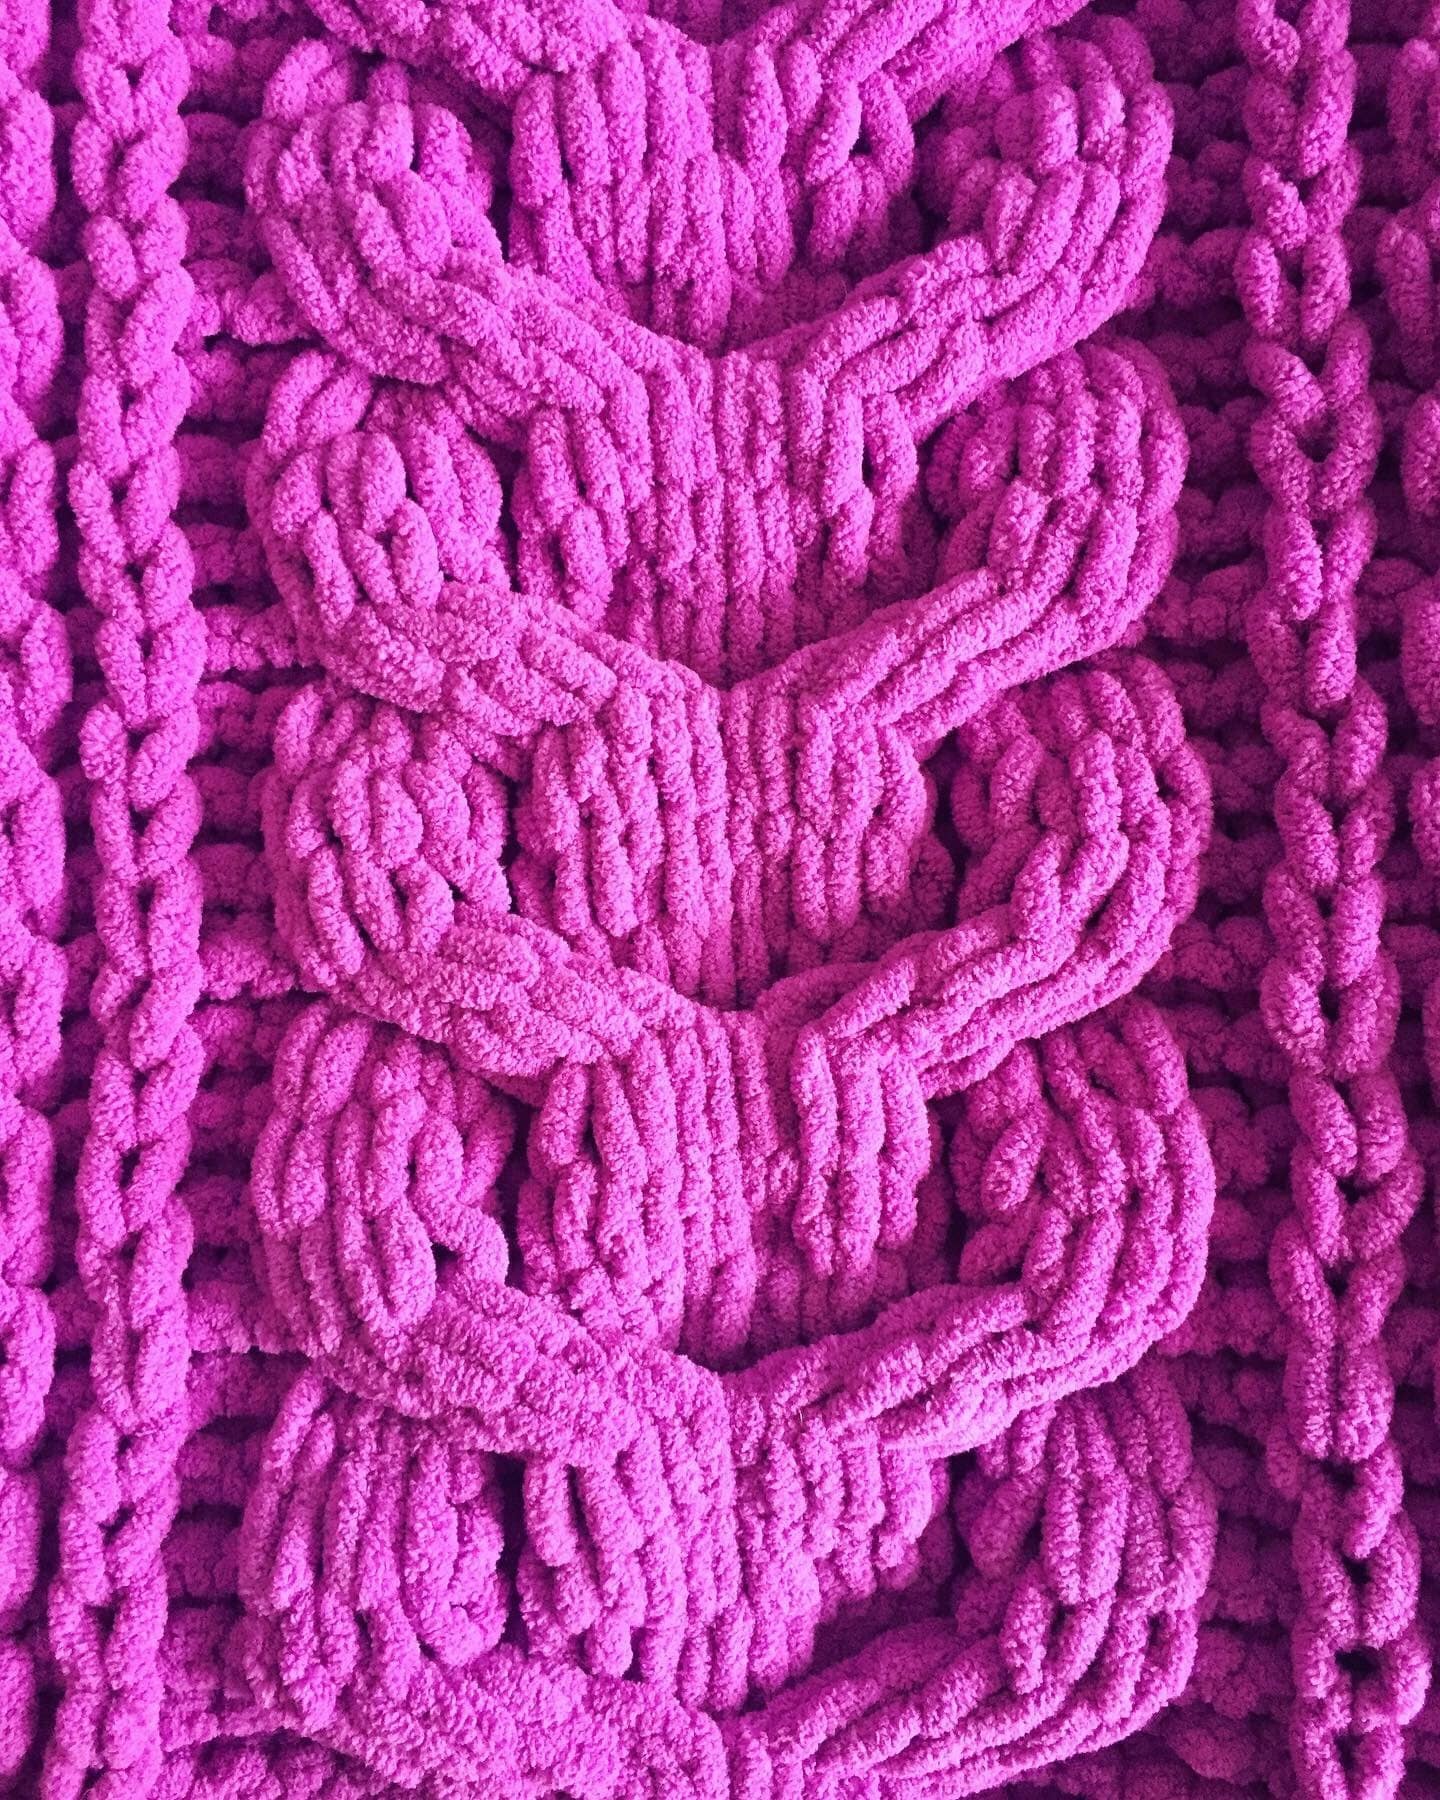 PATTERN: Extra-Chunky Staghorn Cable Blanket - ILoveMyBlanket